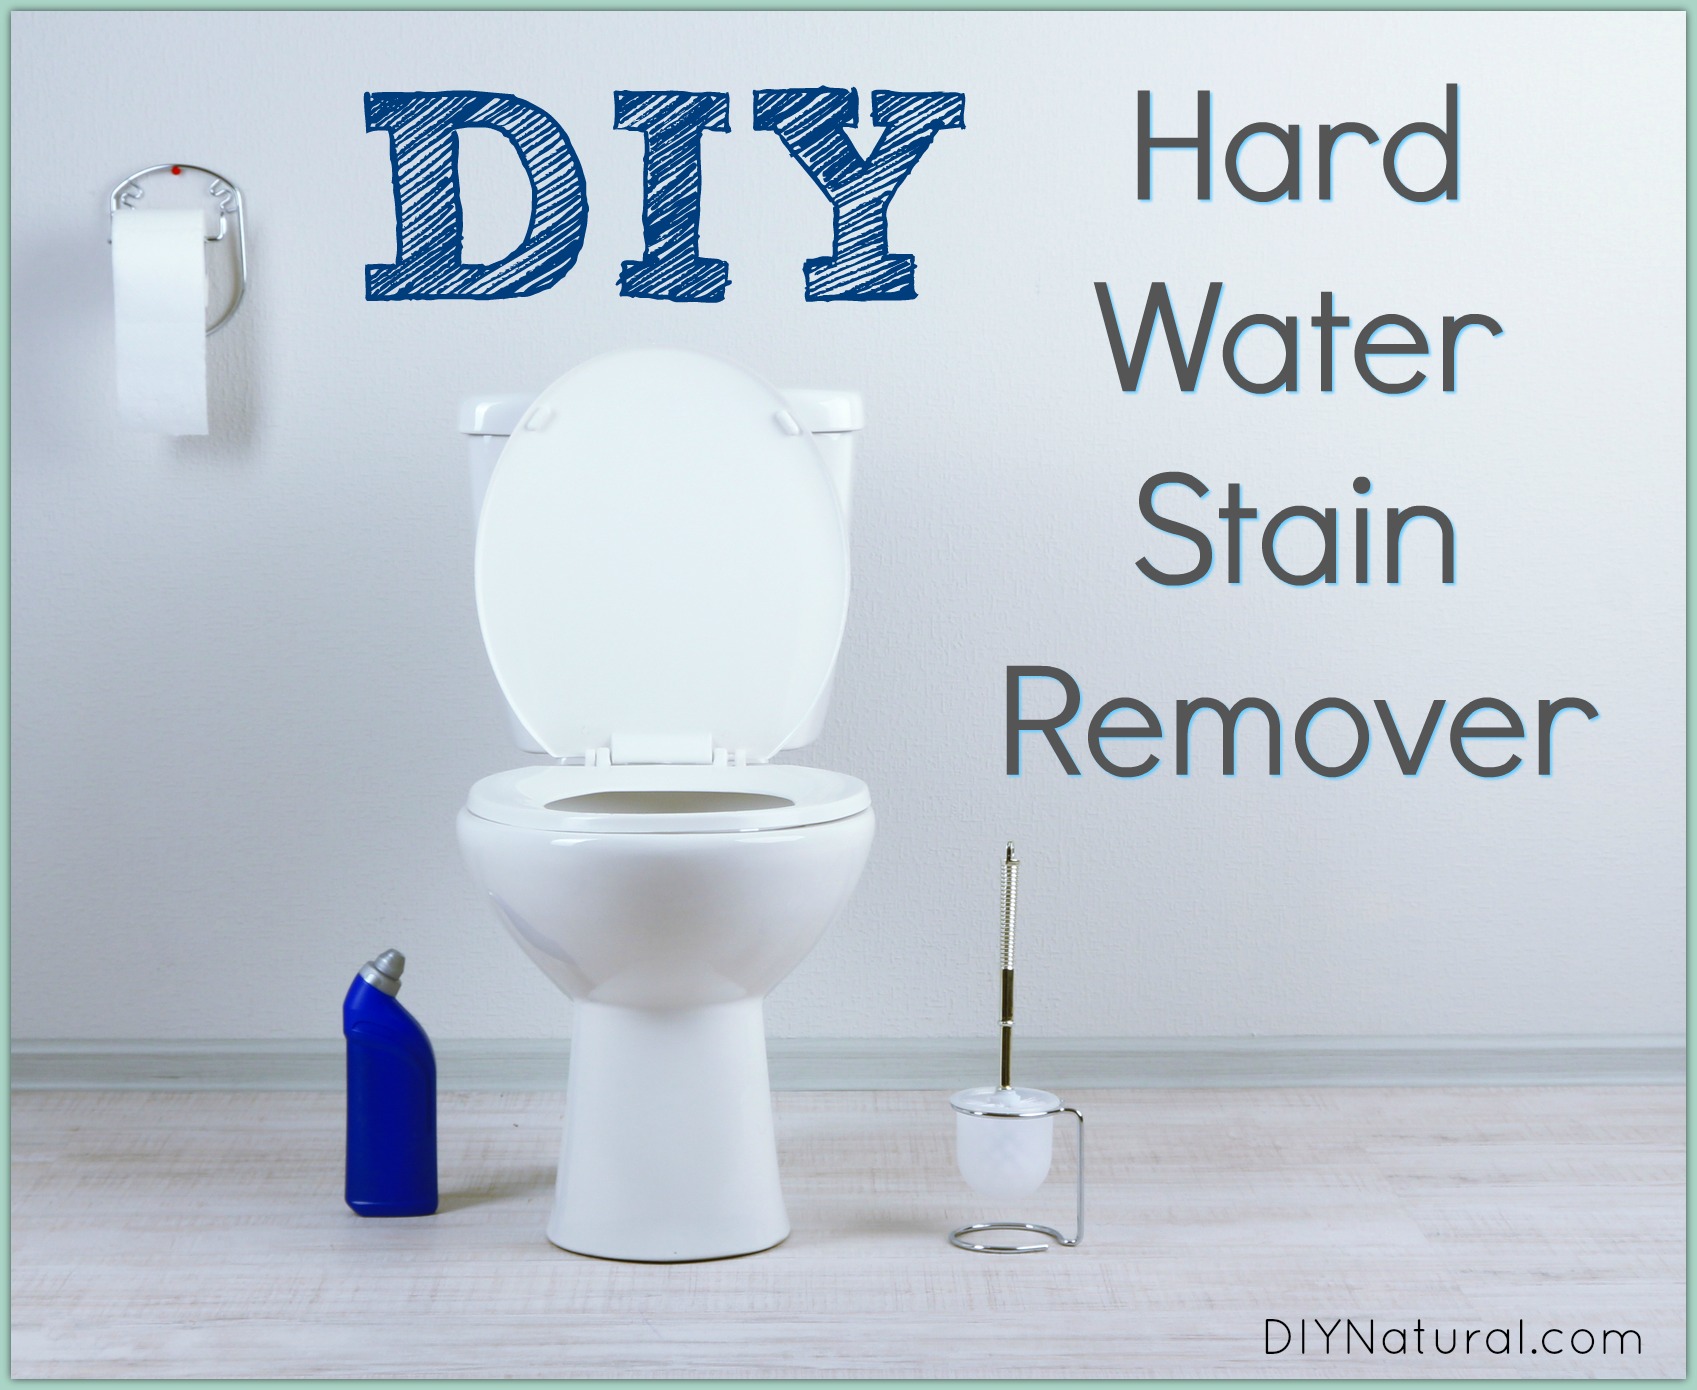 A DIY Hard Water Stain Remover Recipe for Cleaning Toilets and More!